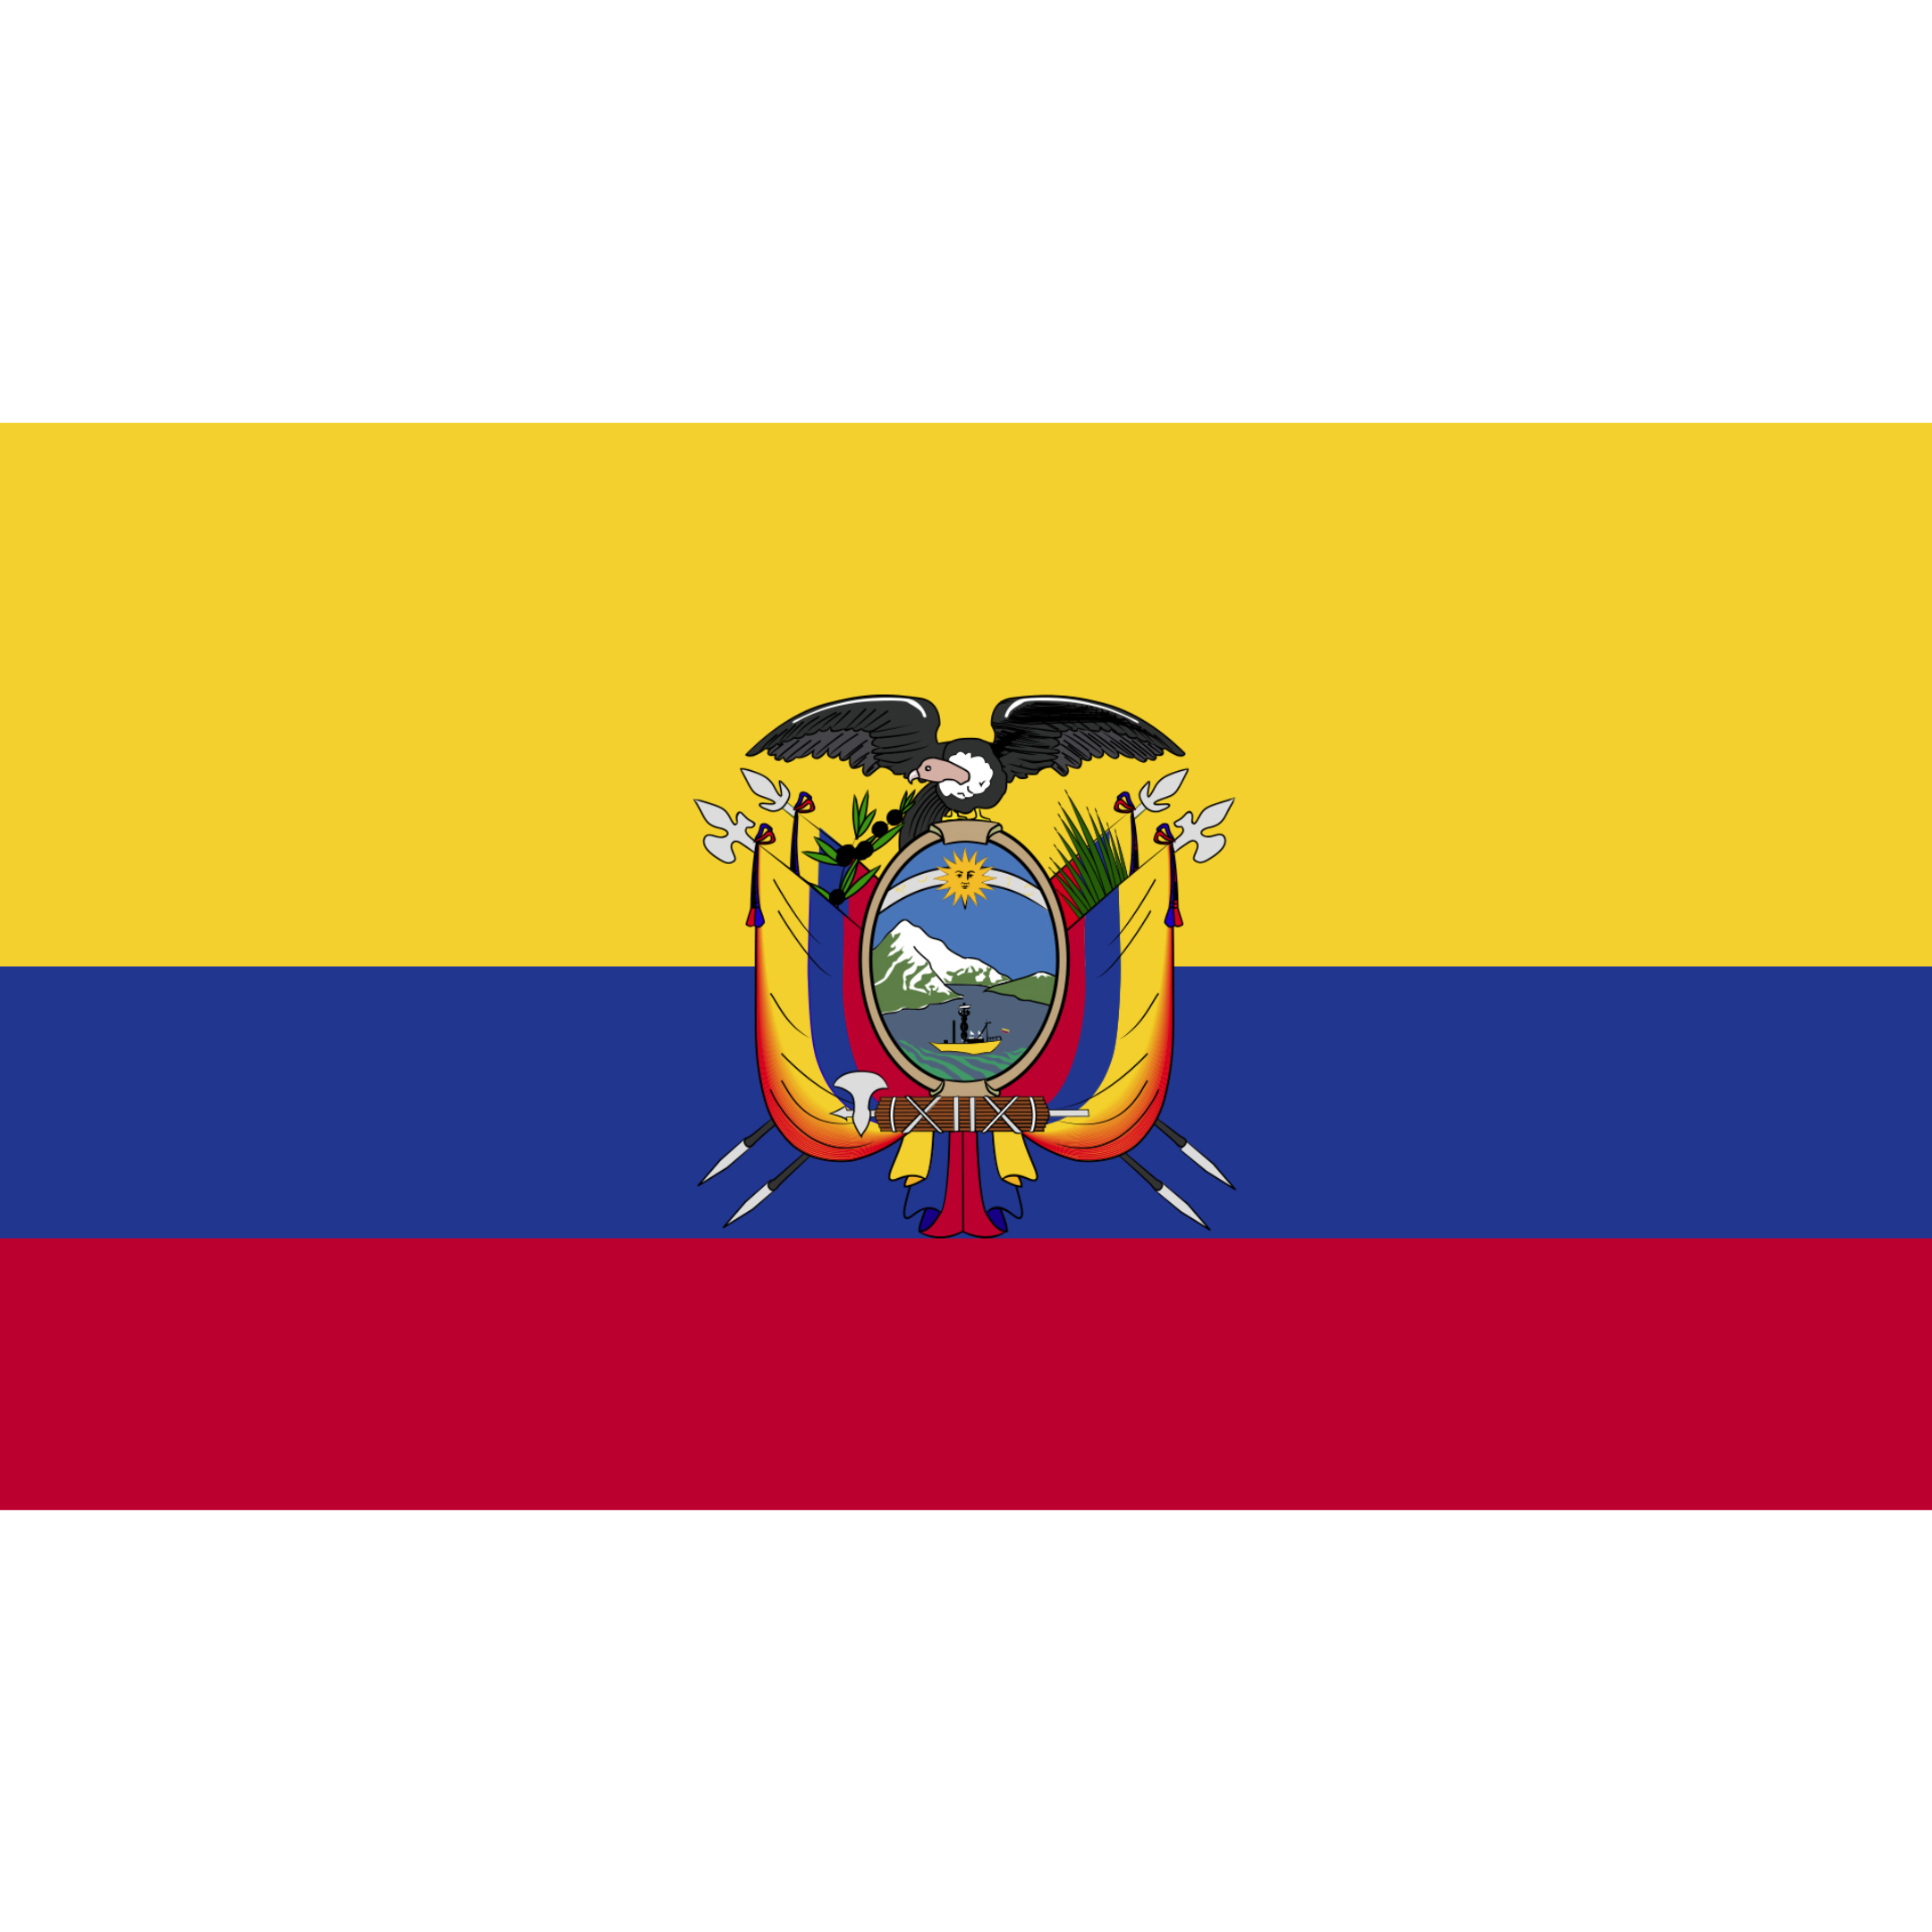 The flag of Ecuador has 3 horizontal bands of yellow (double width), blue and red and a central coat of arms.